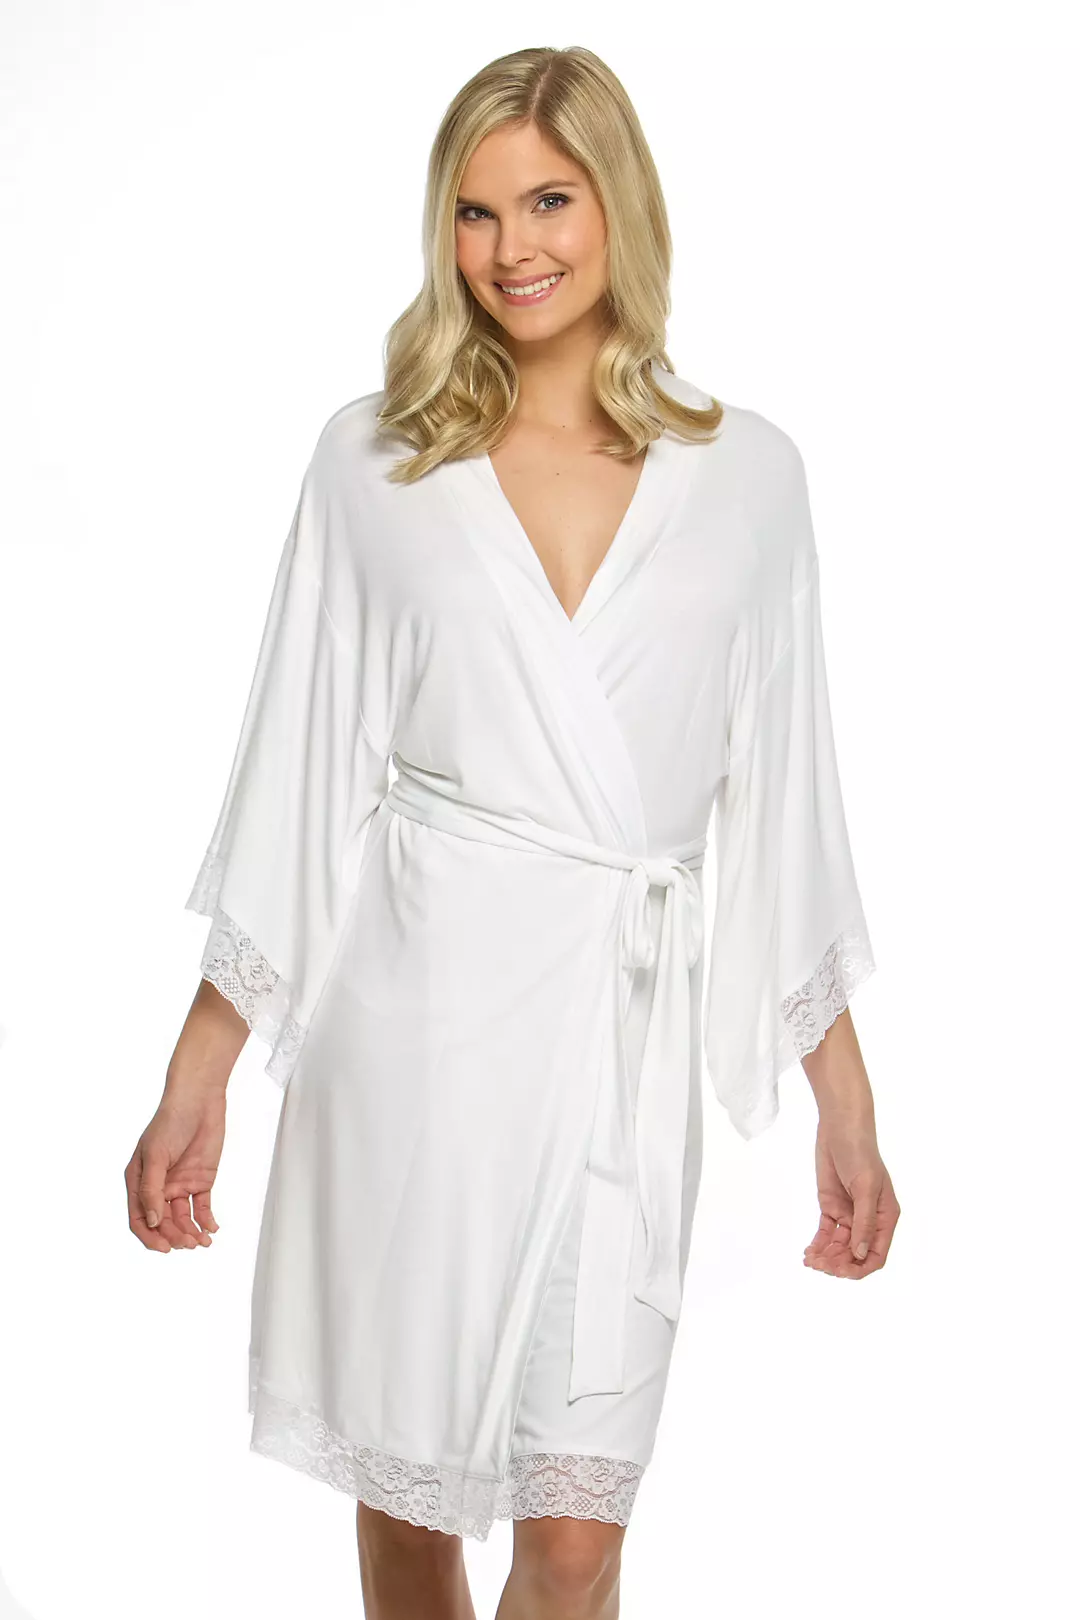 Blank Jersey Robe with Lace Image